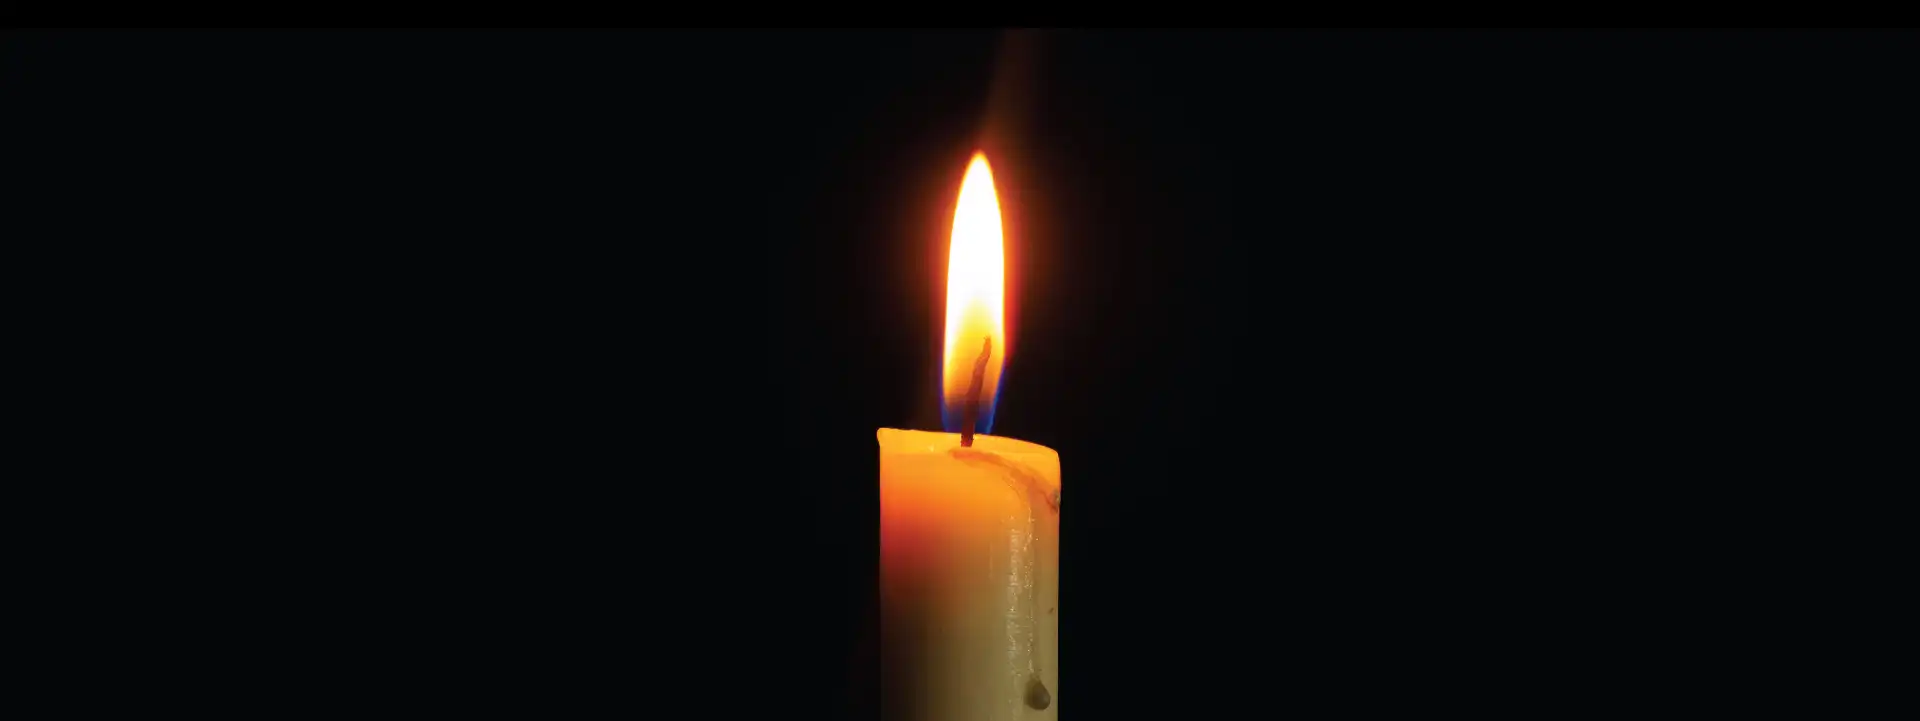 A lit wax candle on a black background